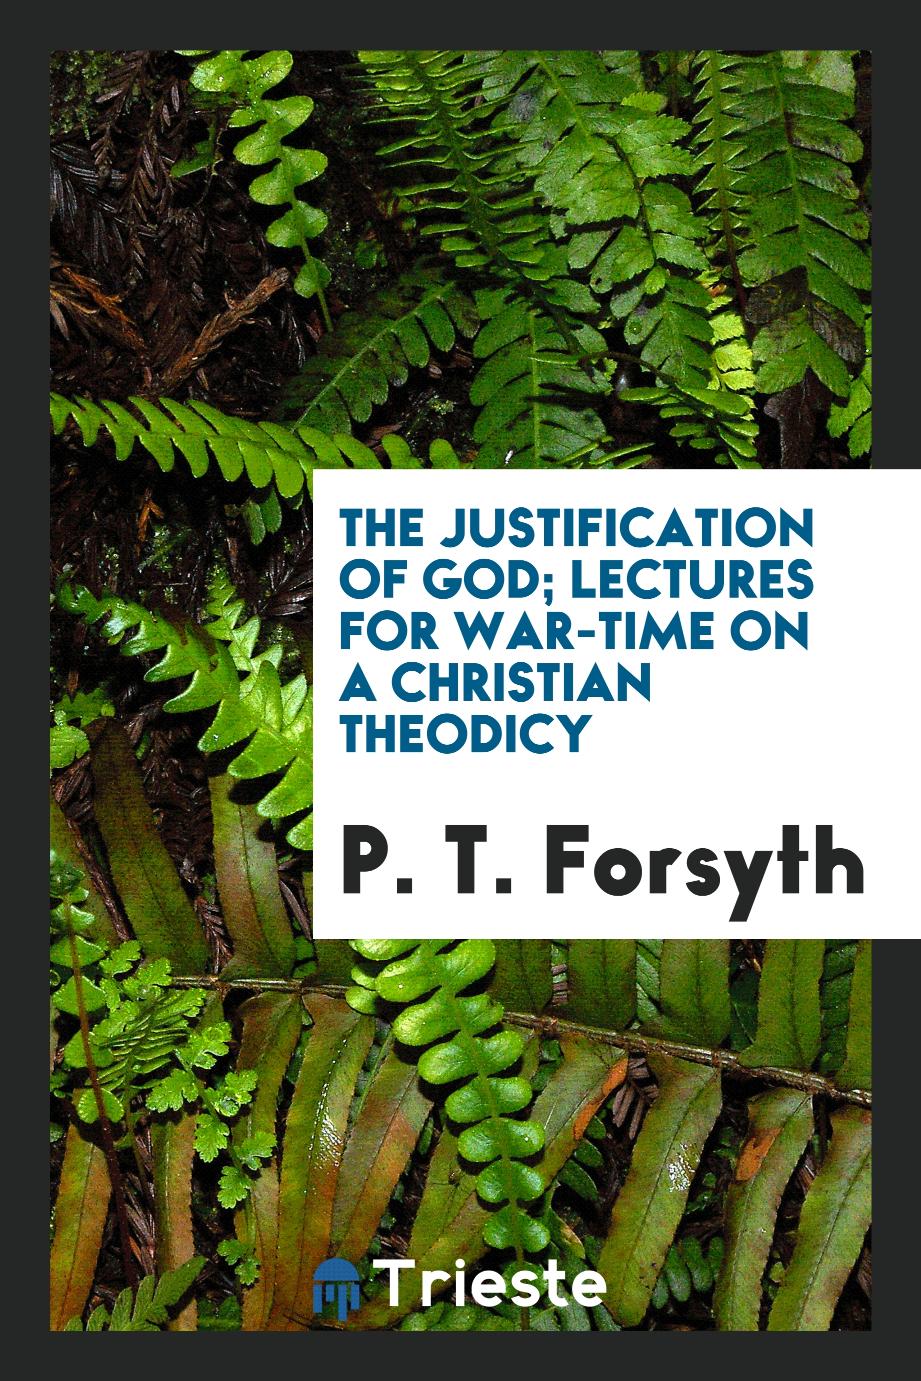 The justification of God; lectures for war-time on a Christian theodicy